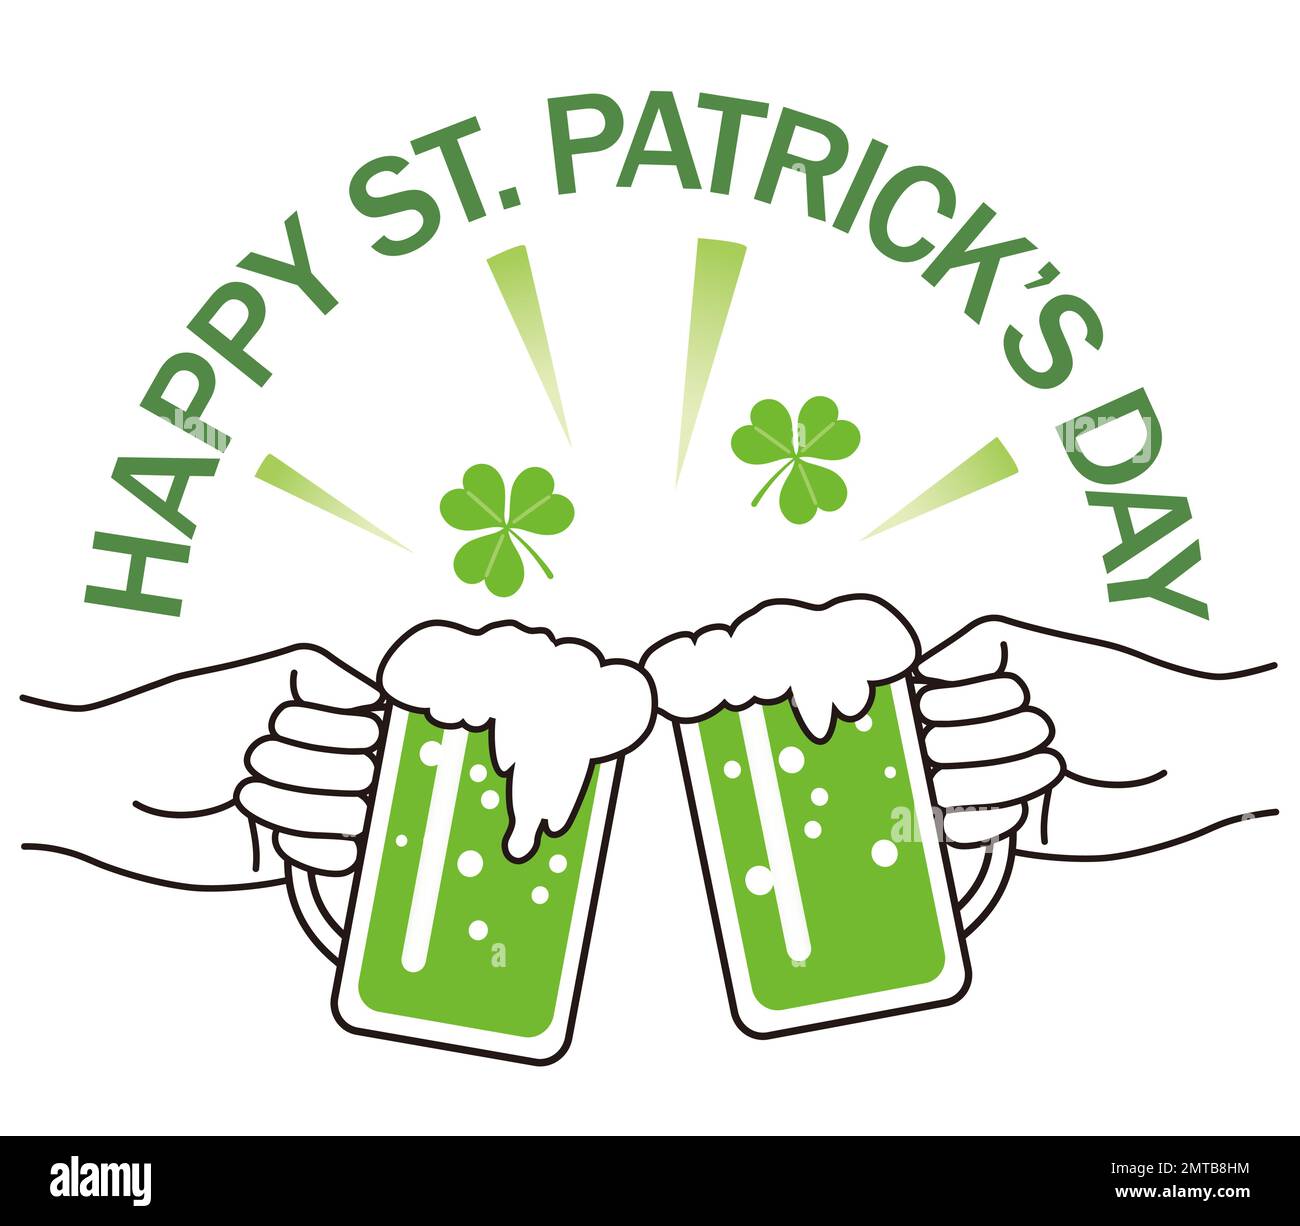 Vector St. Patrick’s Day Green Beer Mugs Illustration Isolated On A White Background. Stock Vector